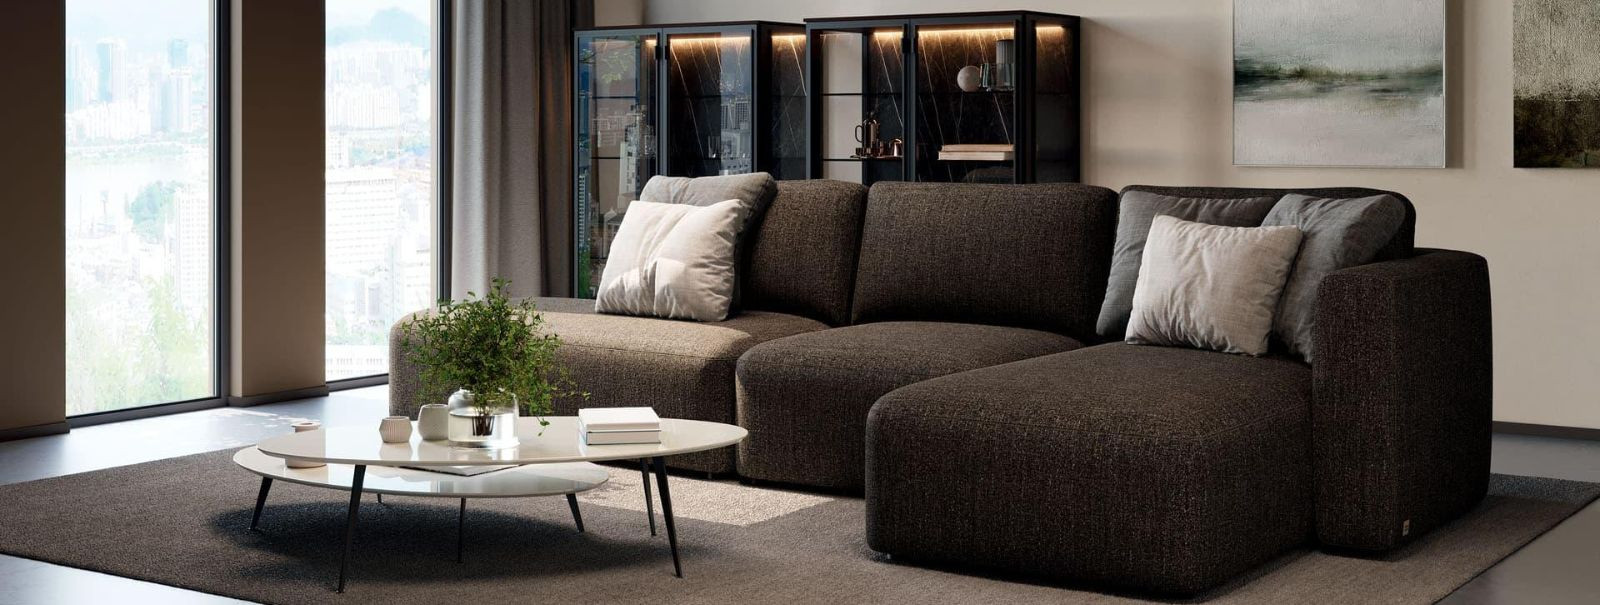 Choosing the perfect sofa is more than just picking a piece of furniture; it's about finding a centerpiece that reflects your style, offers comfort, and stands 